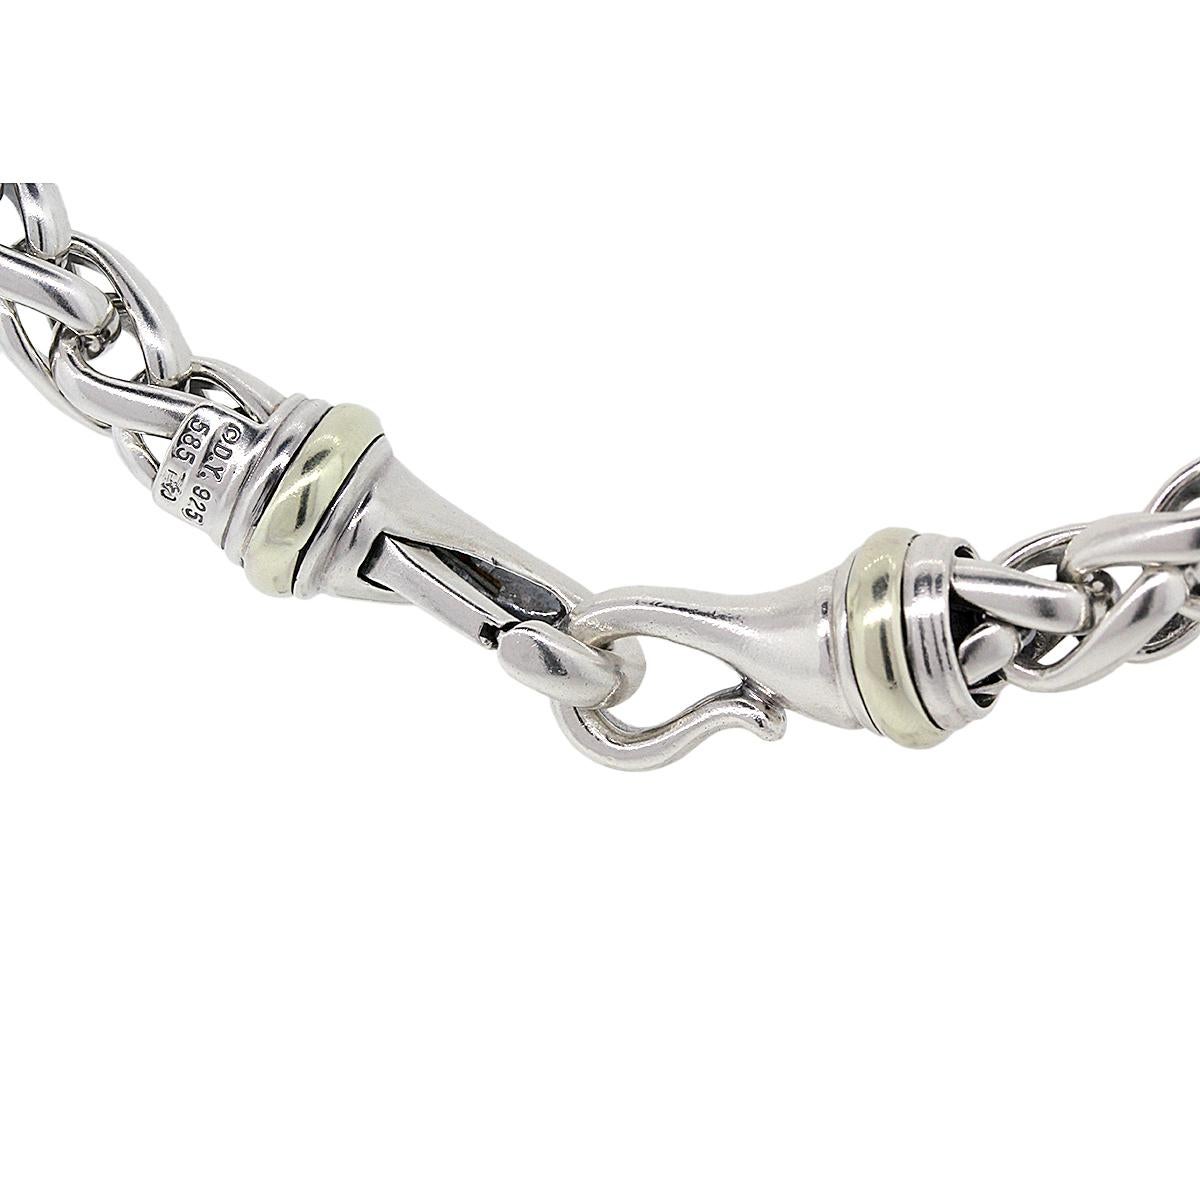 Designer: David Yurman
Material: Sterling silver and 14k yellow gold
Total Weight: 89.1g (57.3dwt)
Measurements: 16″ in length, 8mm in width
SKU: G8004